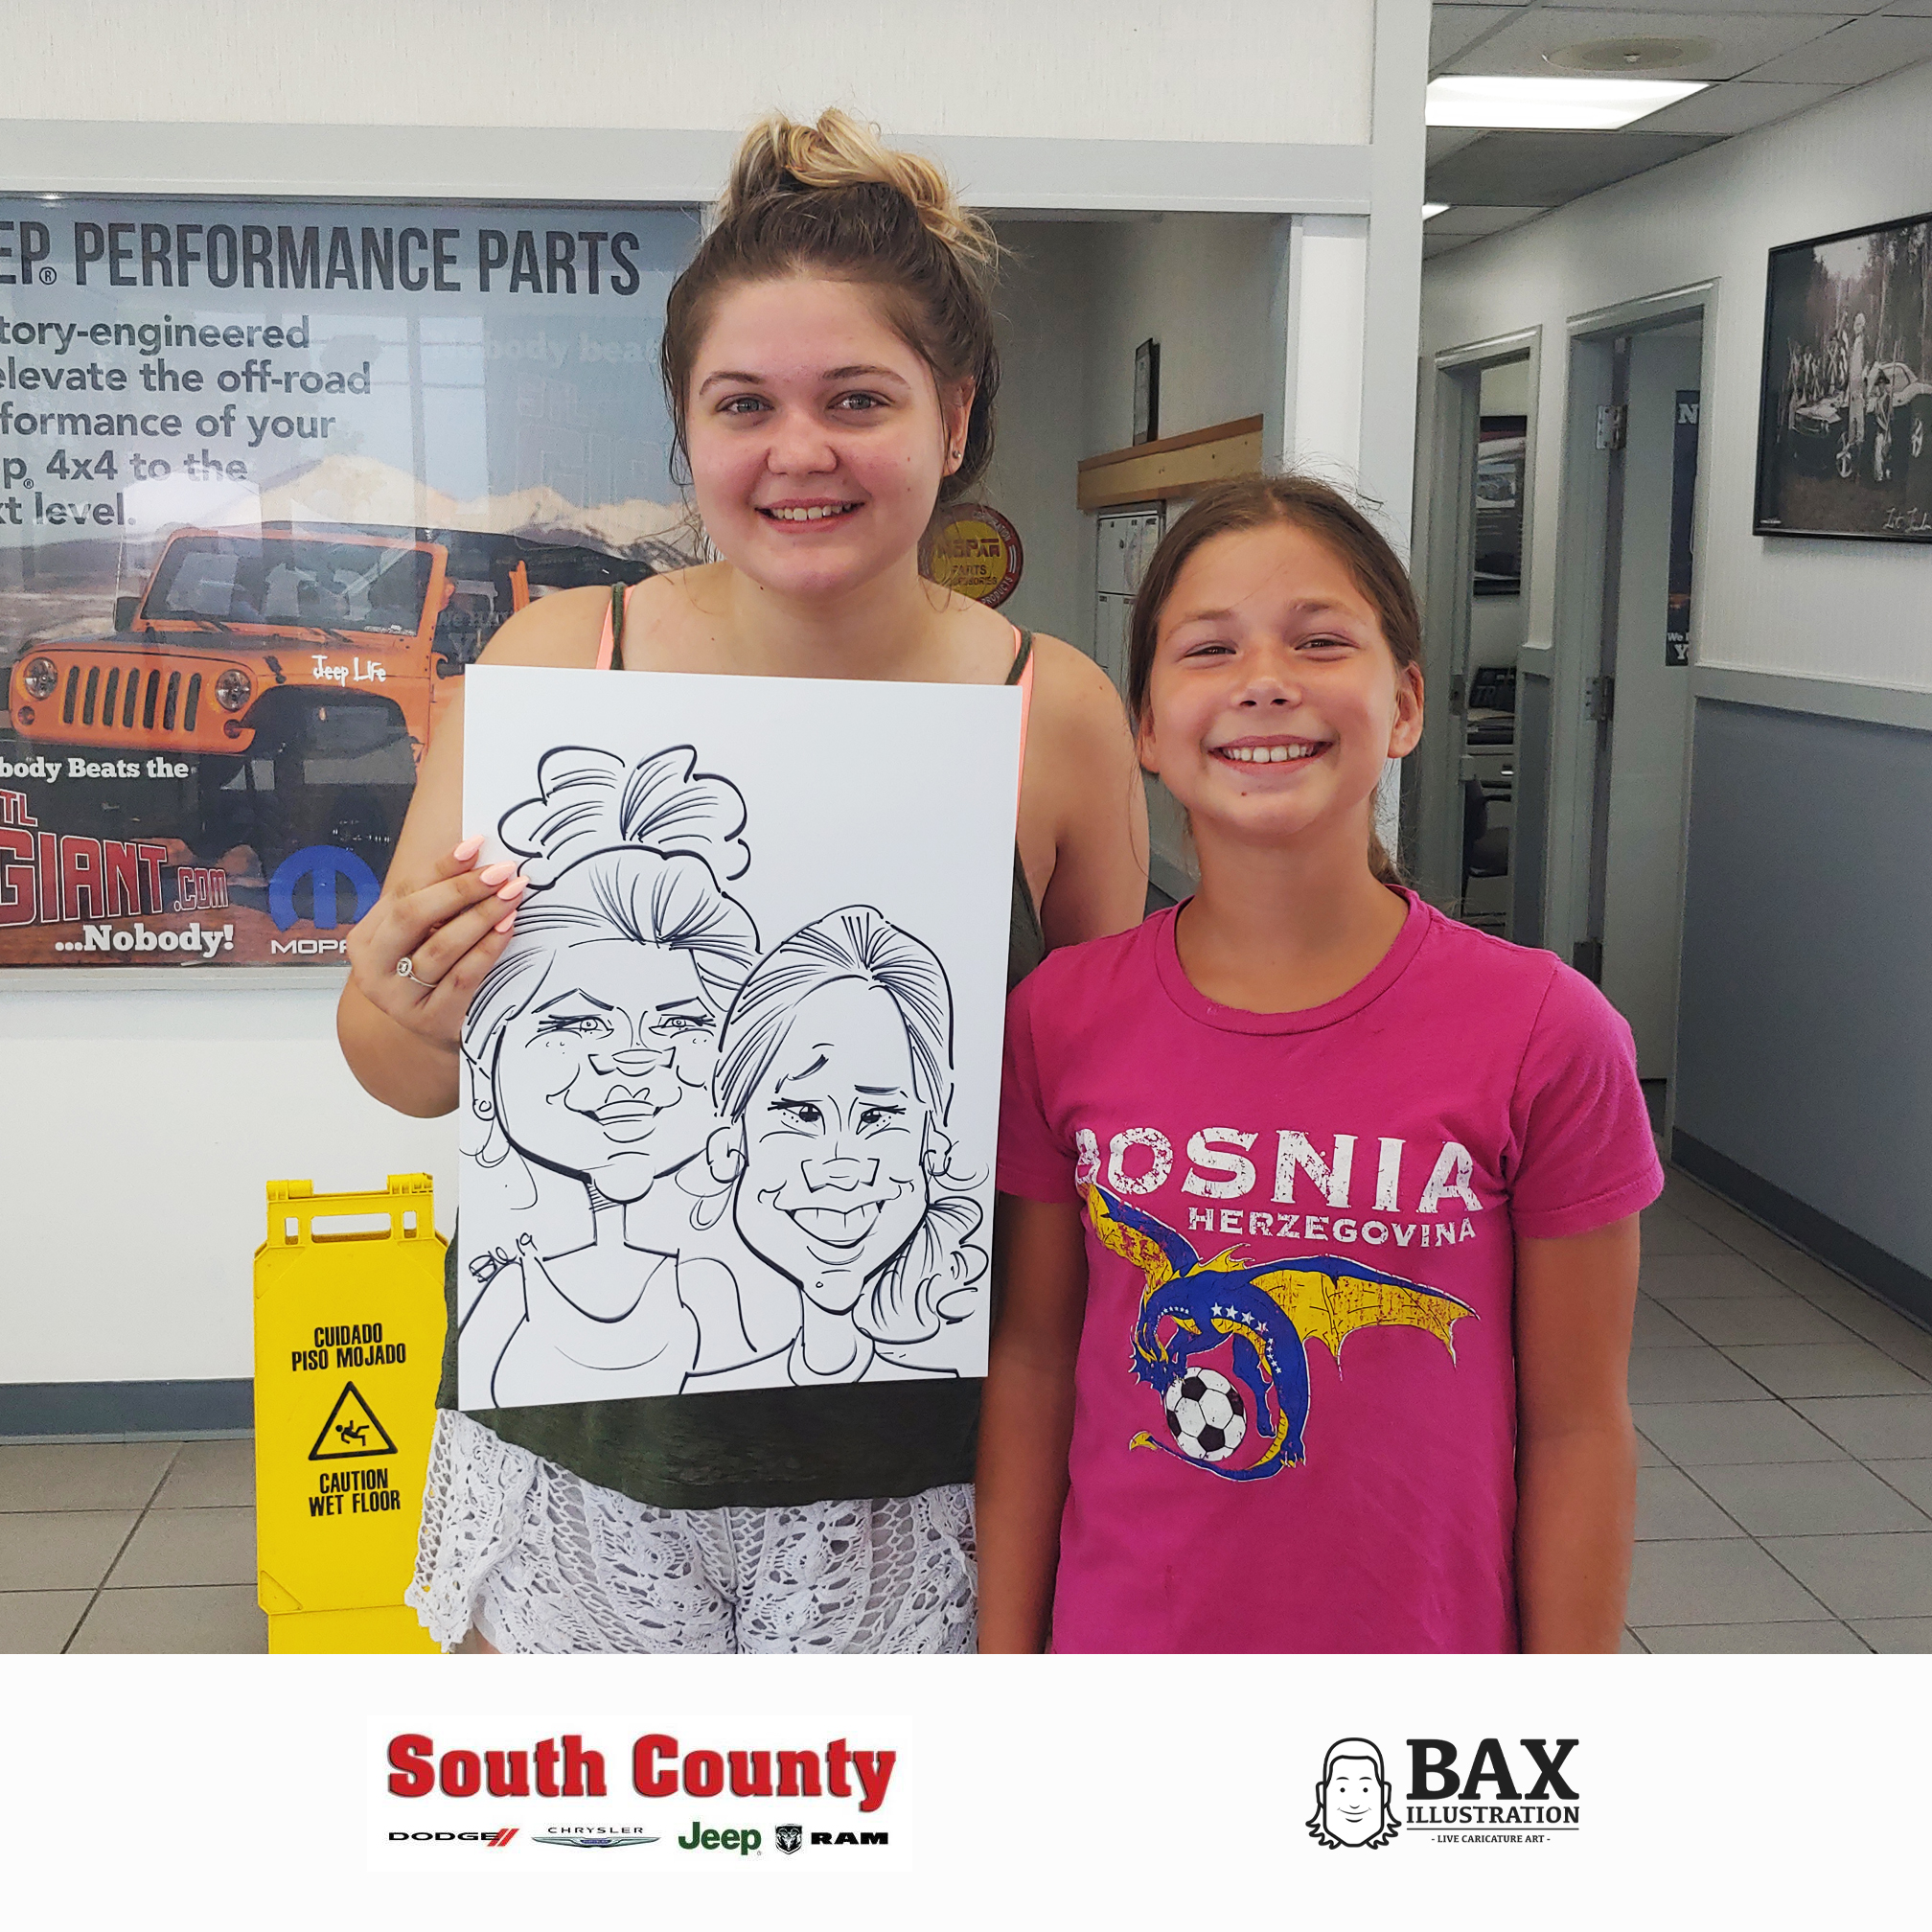 Girls holding caricature by Bax Illustration at South County Dodge Customer Appreciation Event in St. Louis